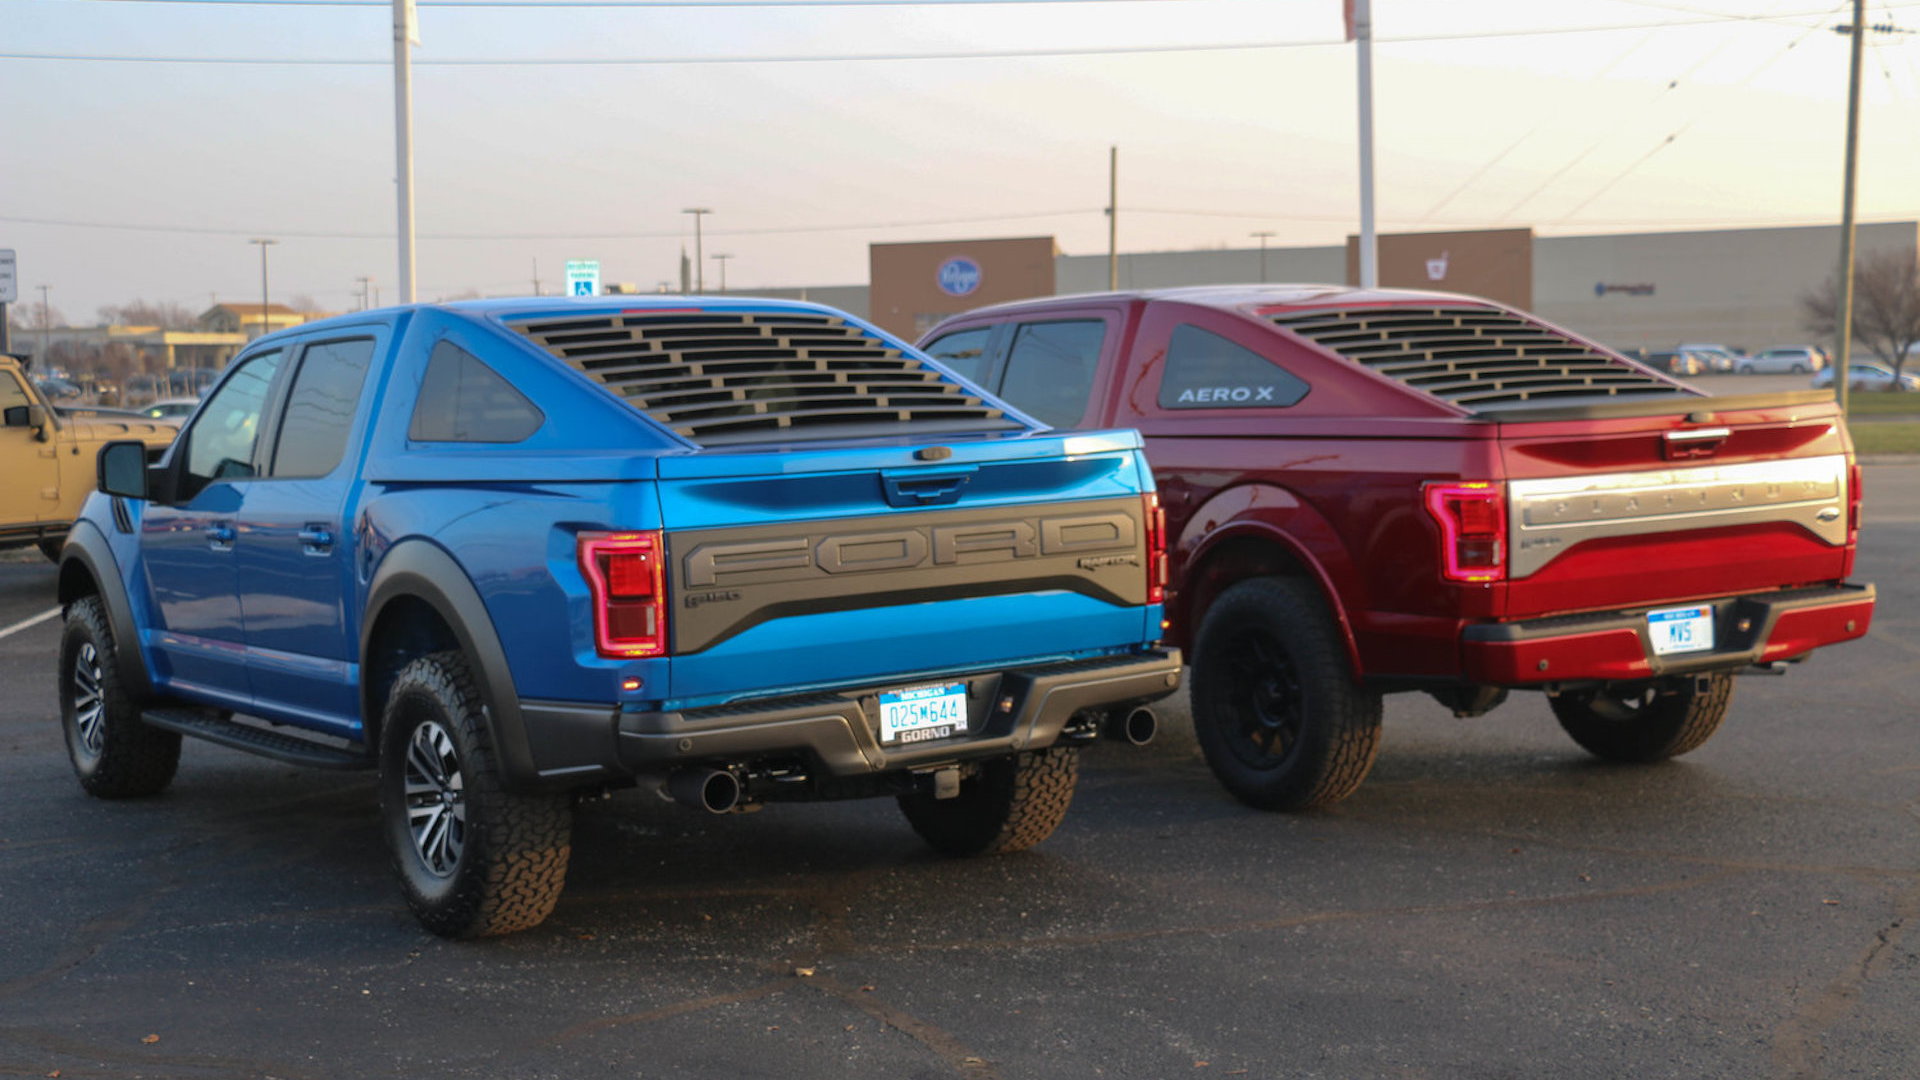 Mustang Fastback-inspired bed cap for Ford F-150, via Michigan Vehicle Solutions